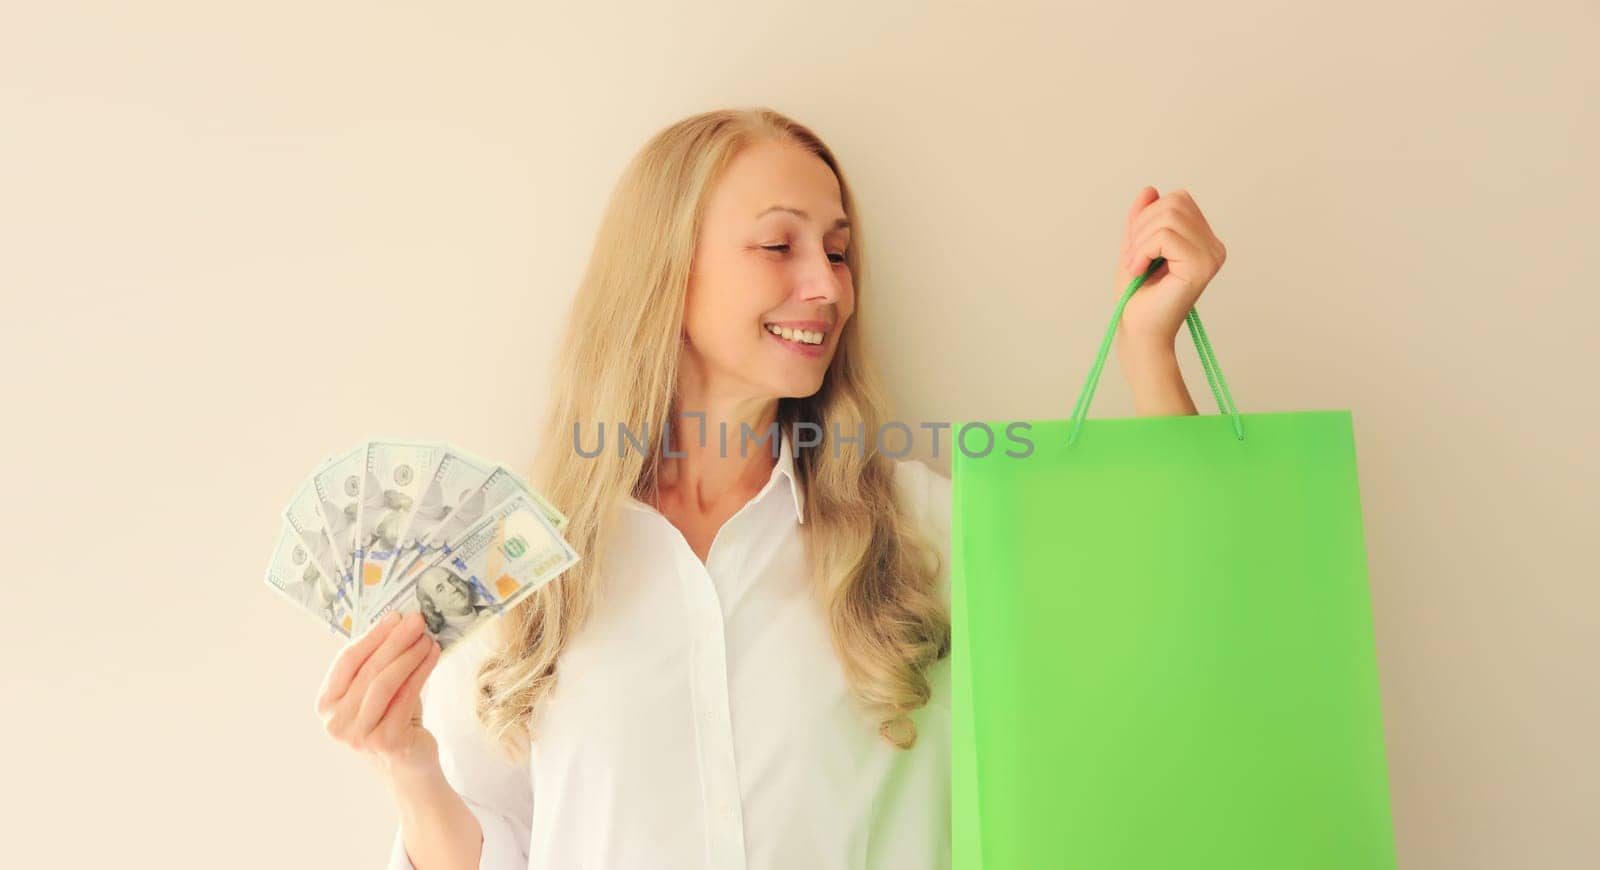 Portrait of happy smiling middle aged woman with shopping bags holding cash money in dollar bills in her hands